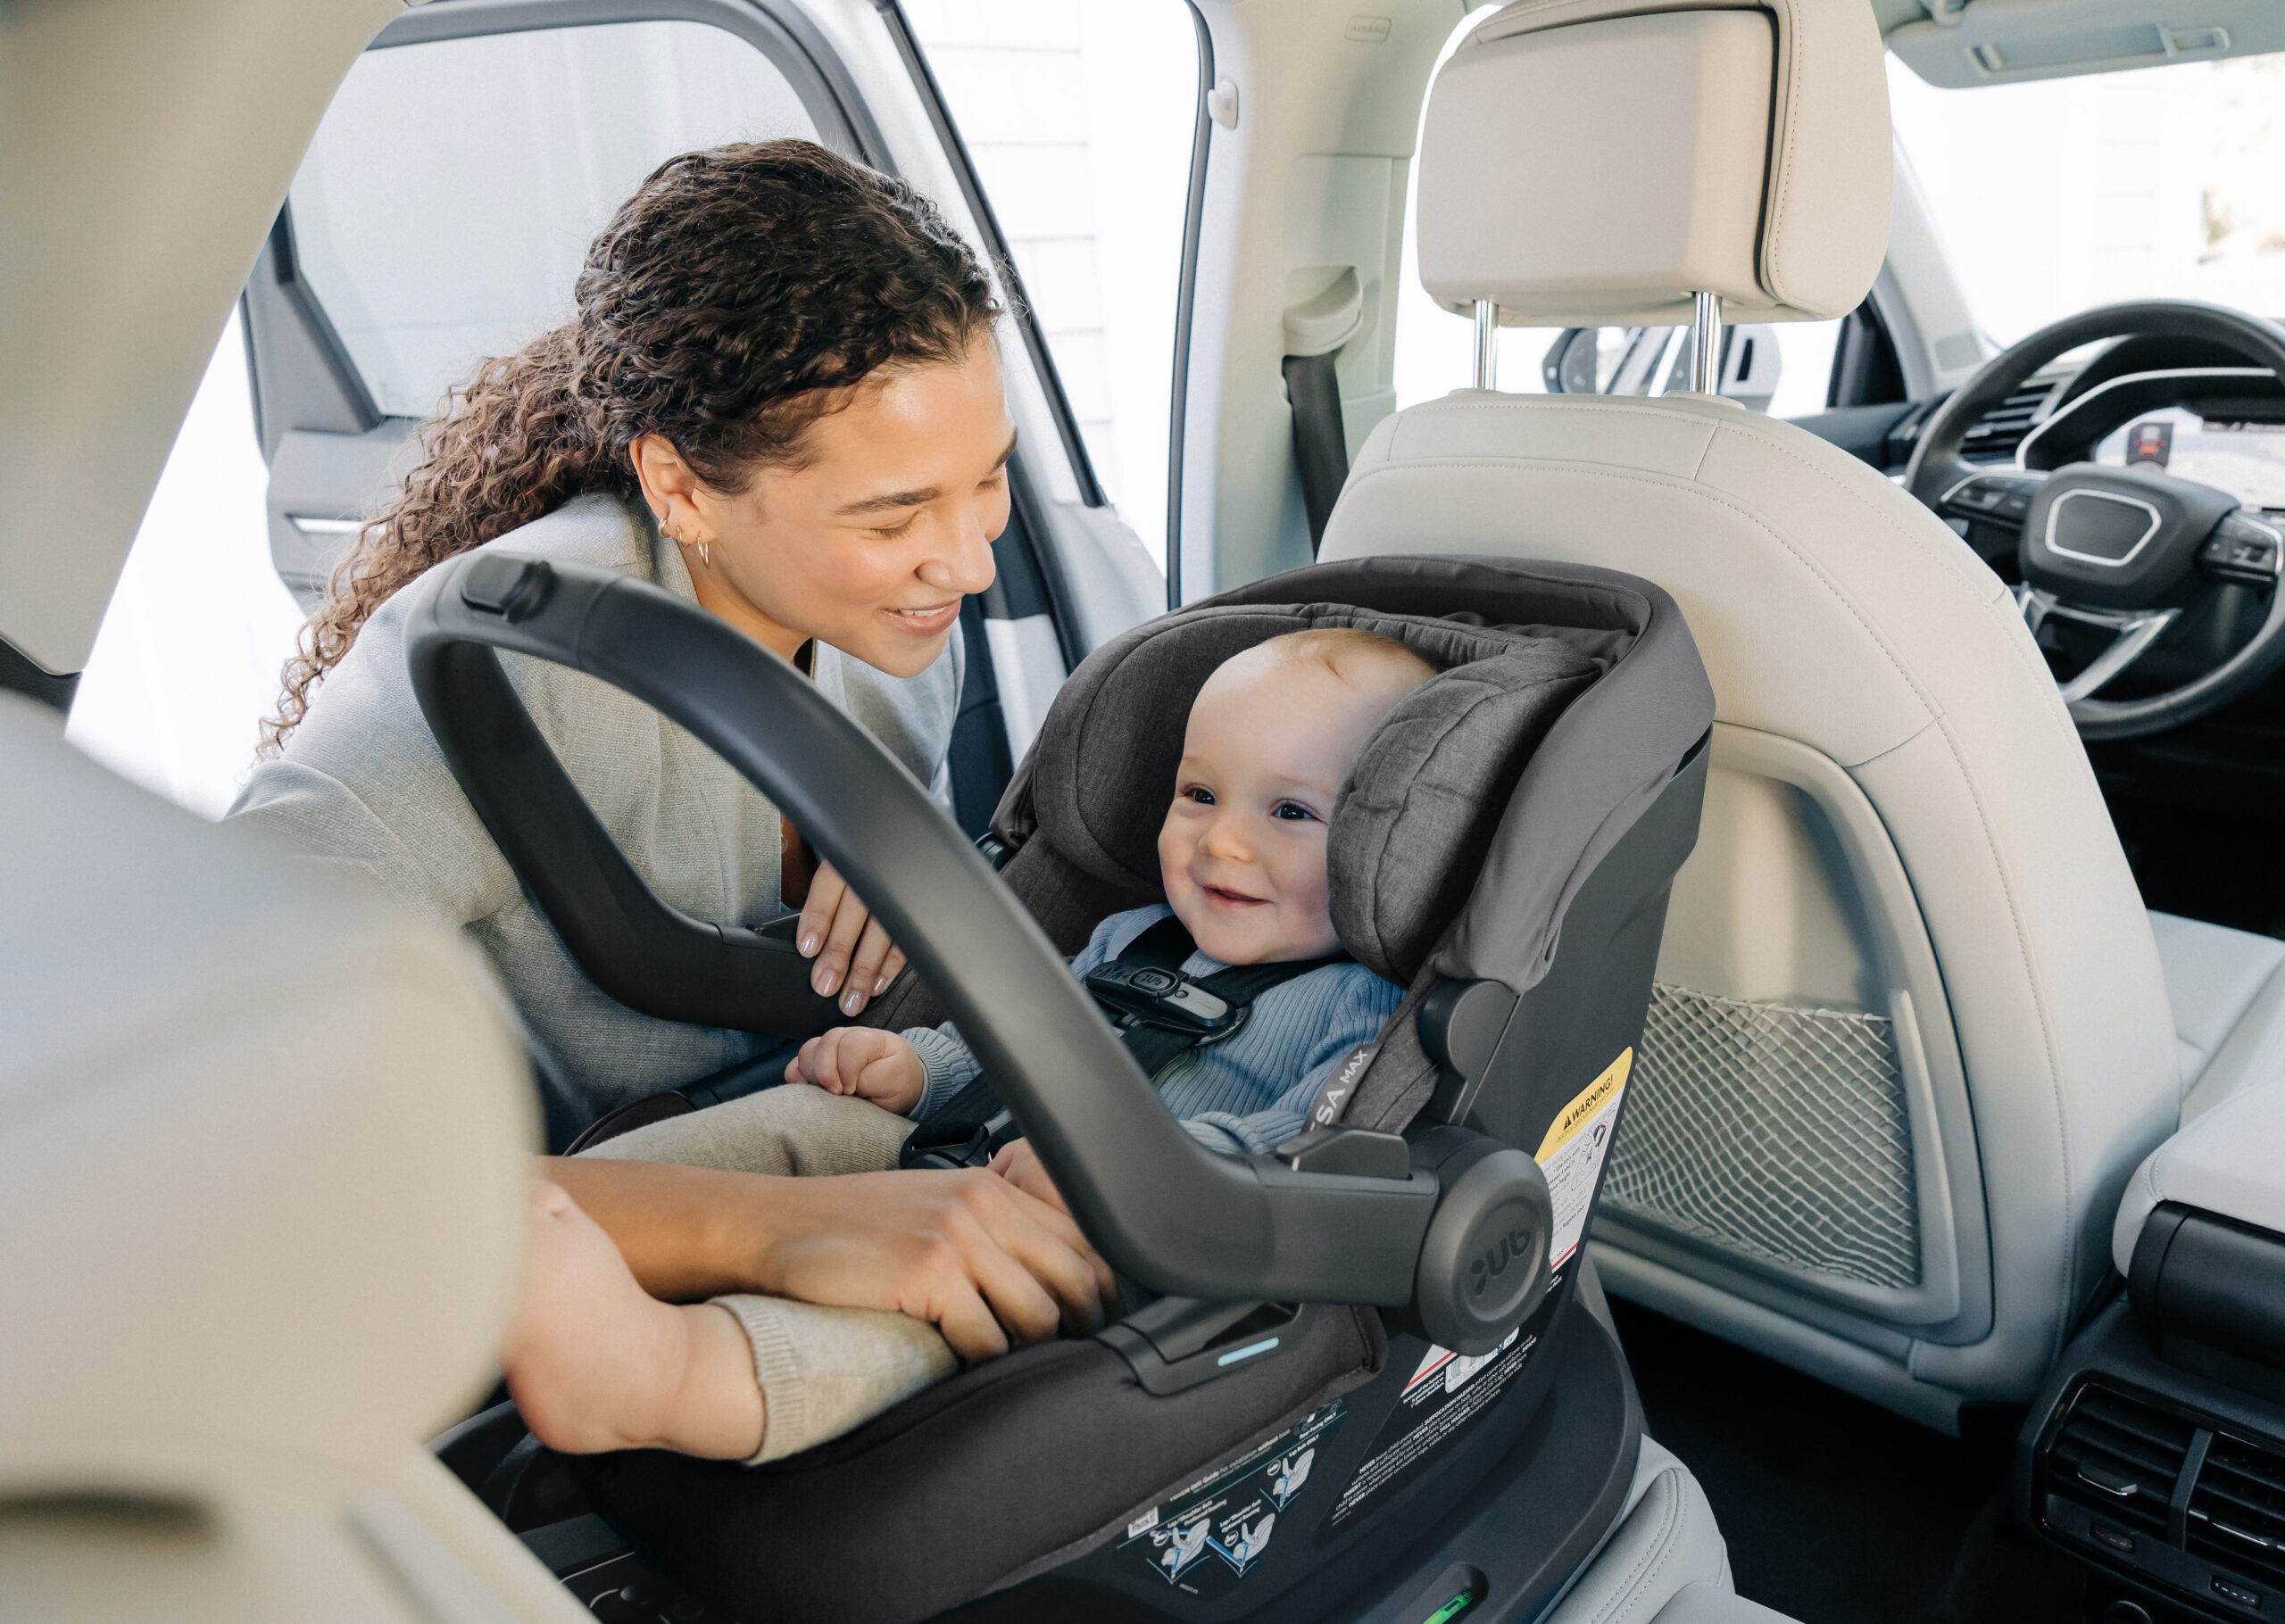 Children's safety seats have evolved to provide better protection